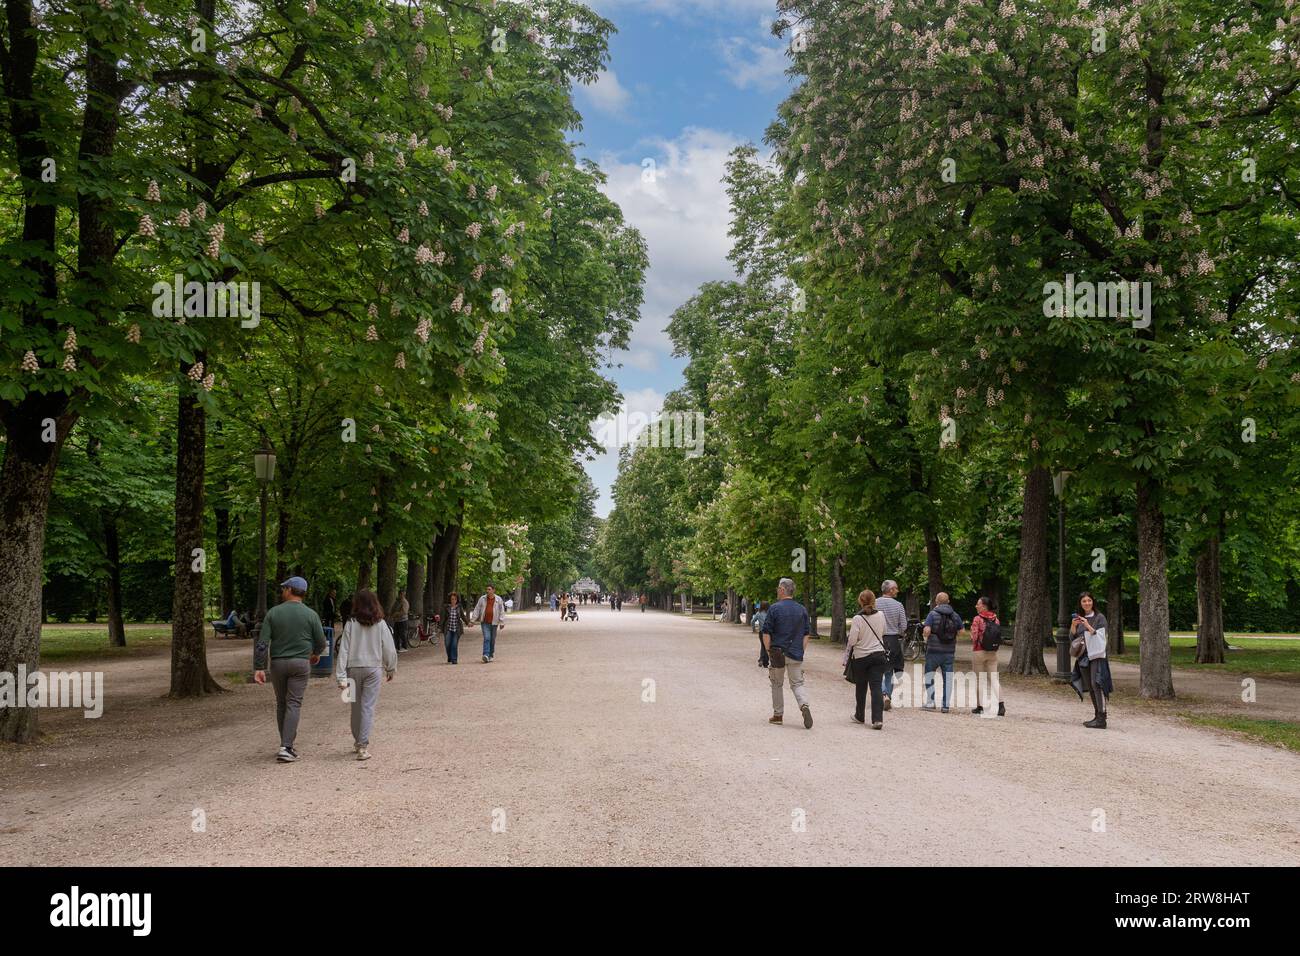 Parco Ducale historic park (16th century), with people walking in the main avenue lined with horse chestnuts in spring, Parma, Emilia-Romagna, Italy Stock Photo